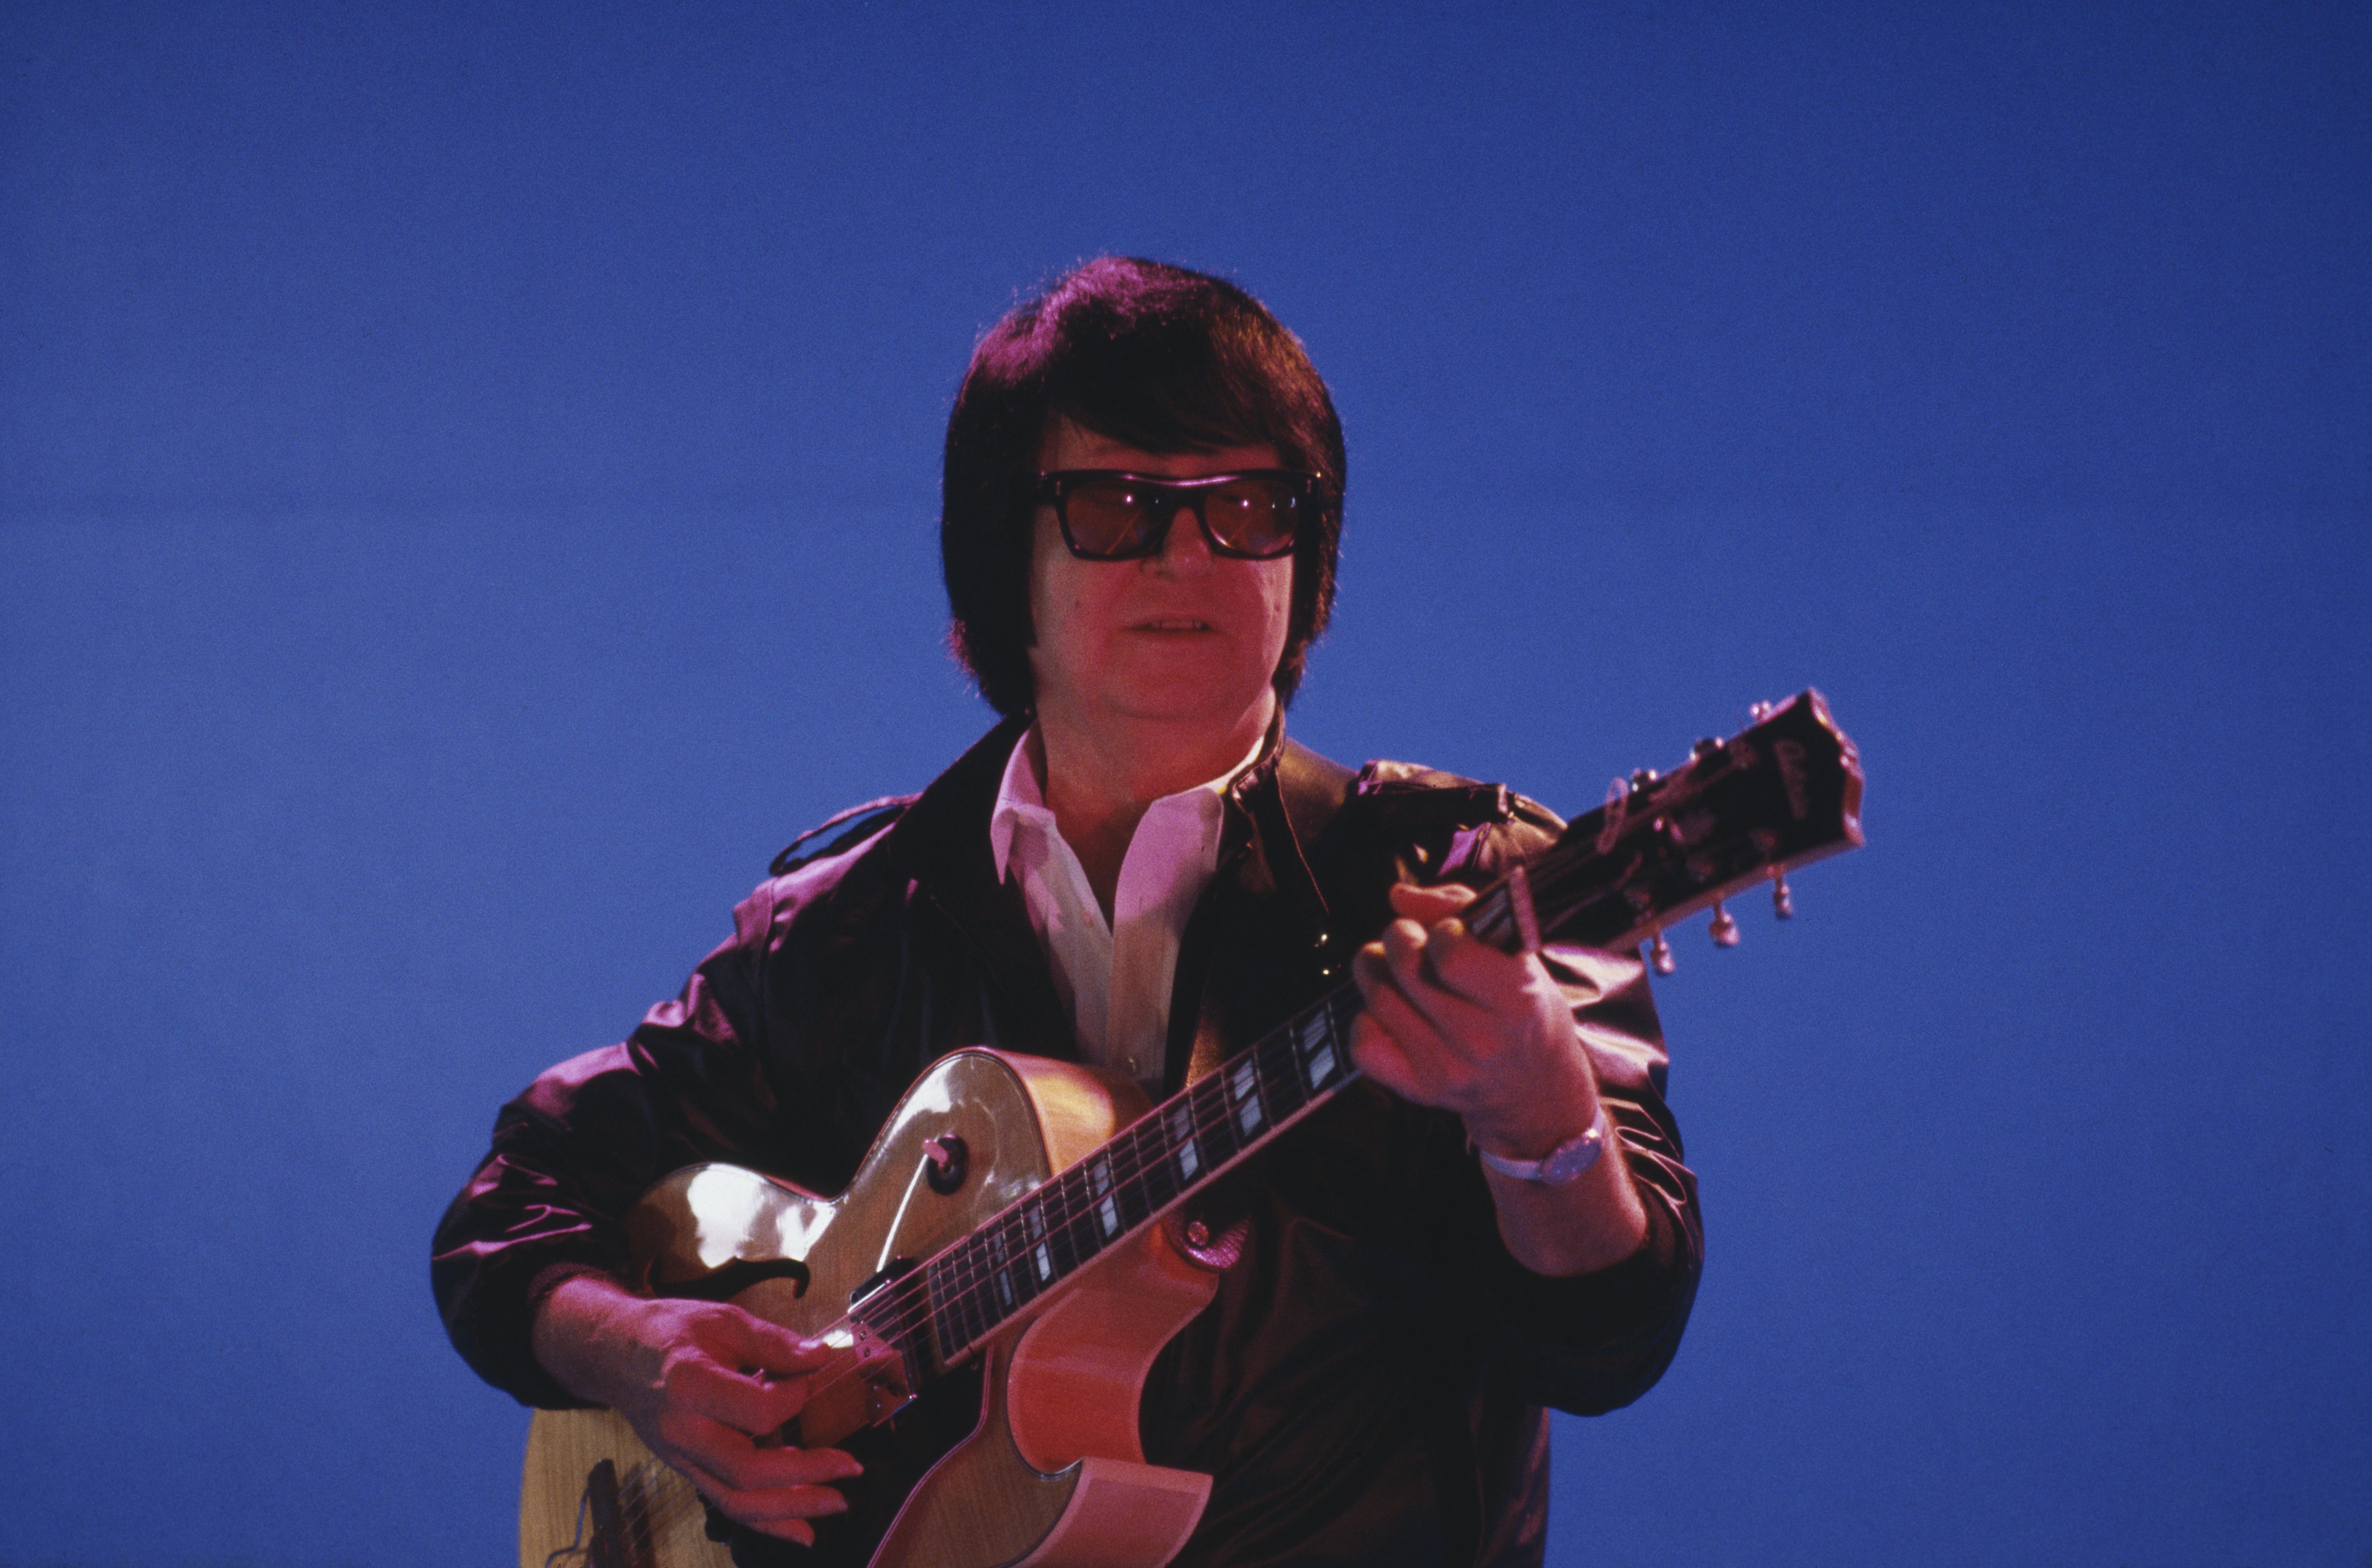 Roy Orbison circa 1980 | Source: Getty Images